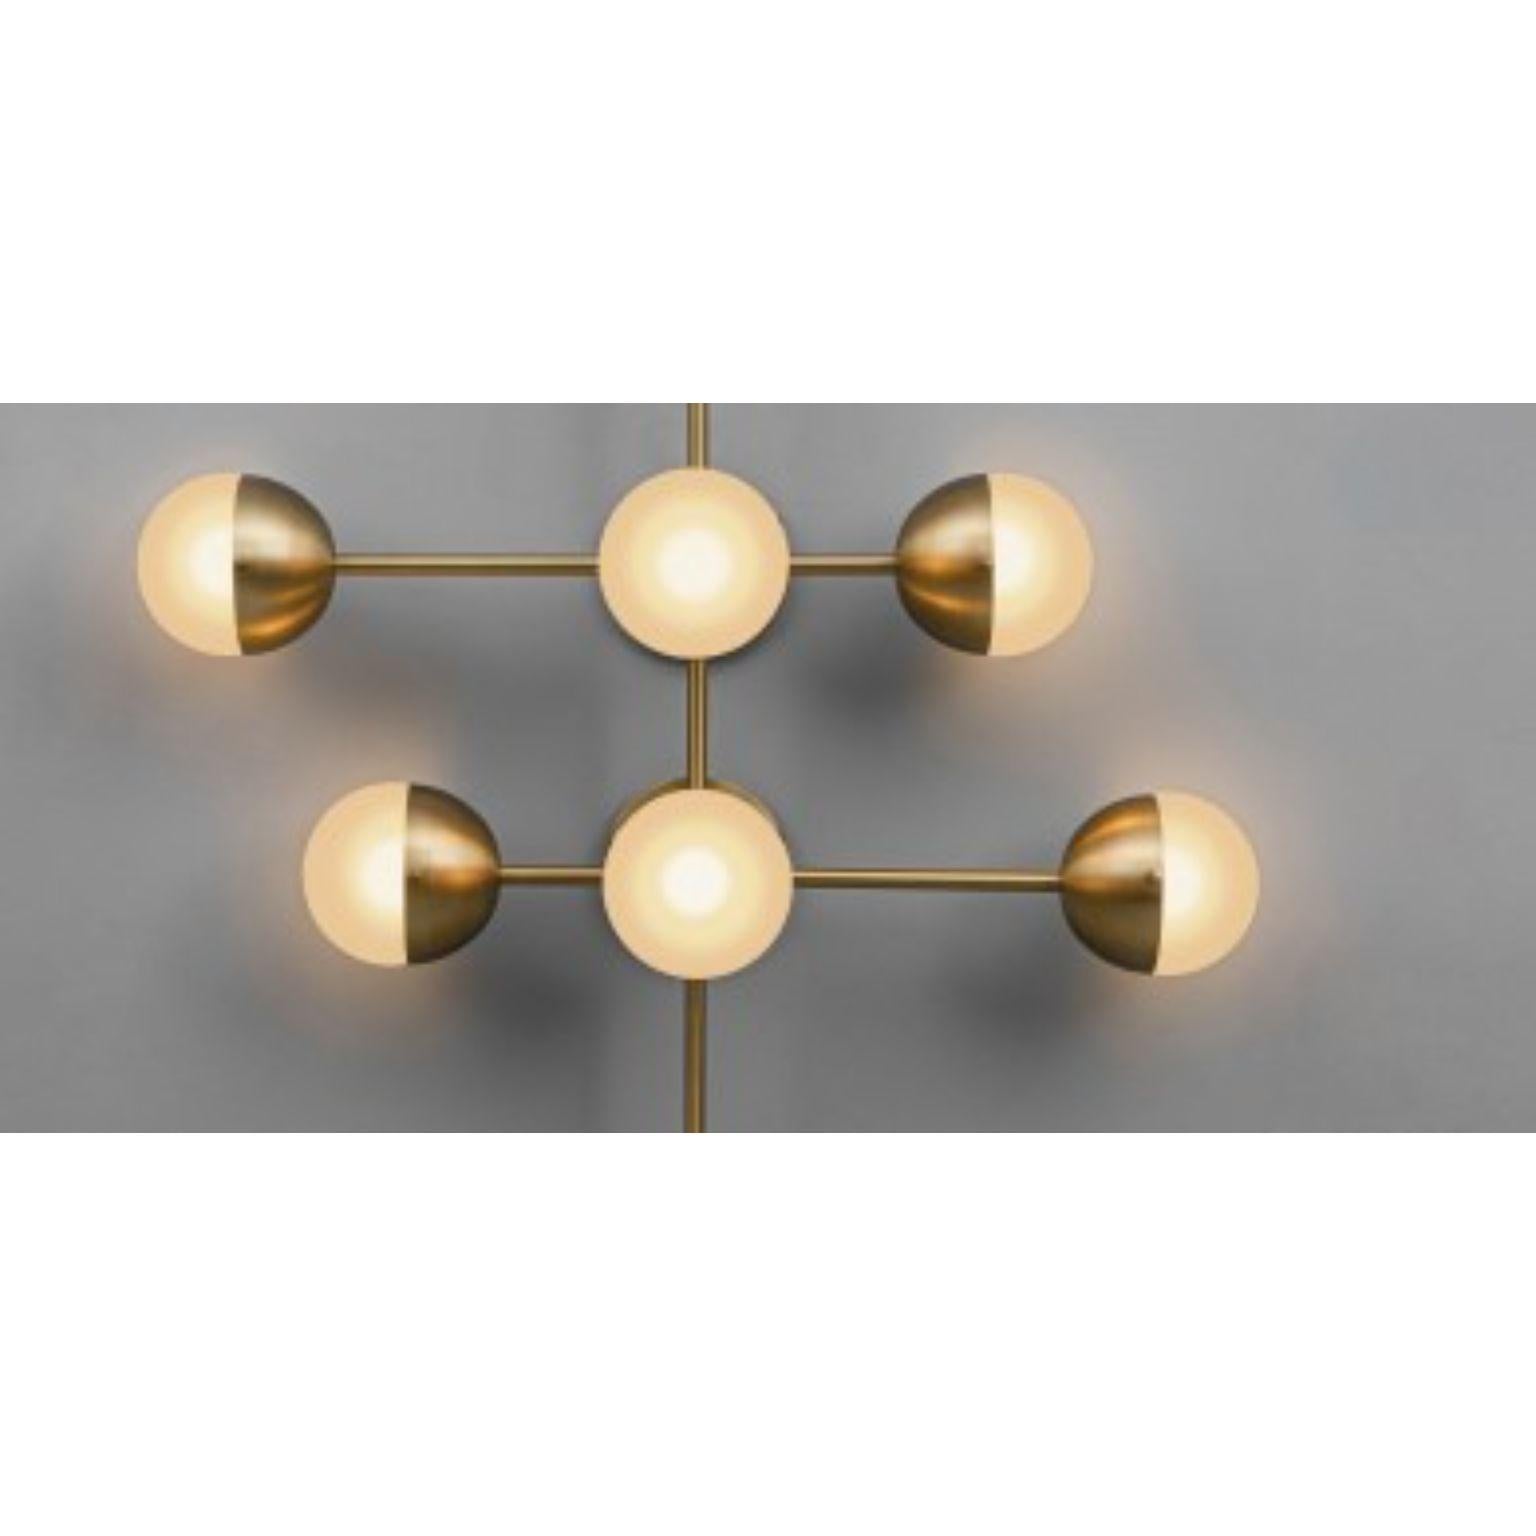 Polish Molecule 8 Wall Sconce by Schwung For Sale